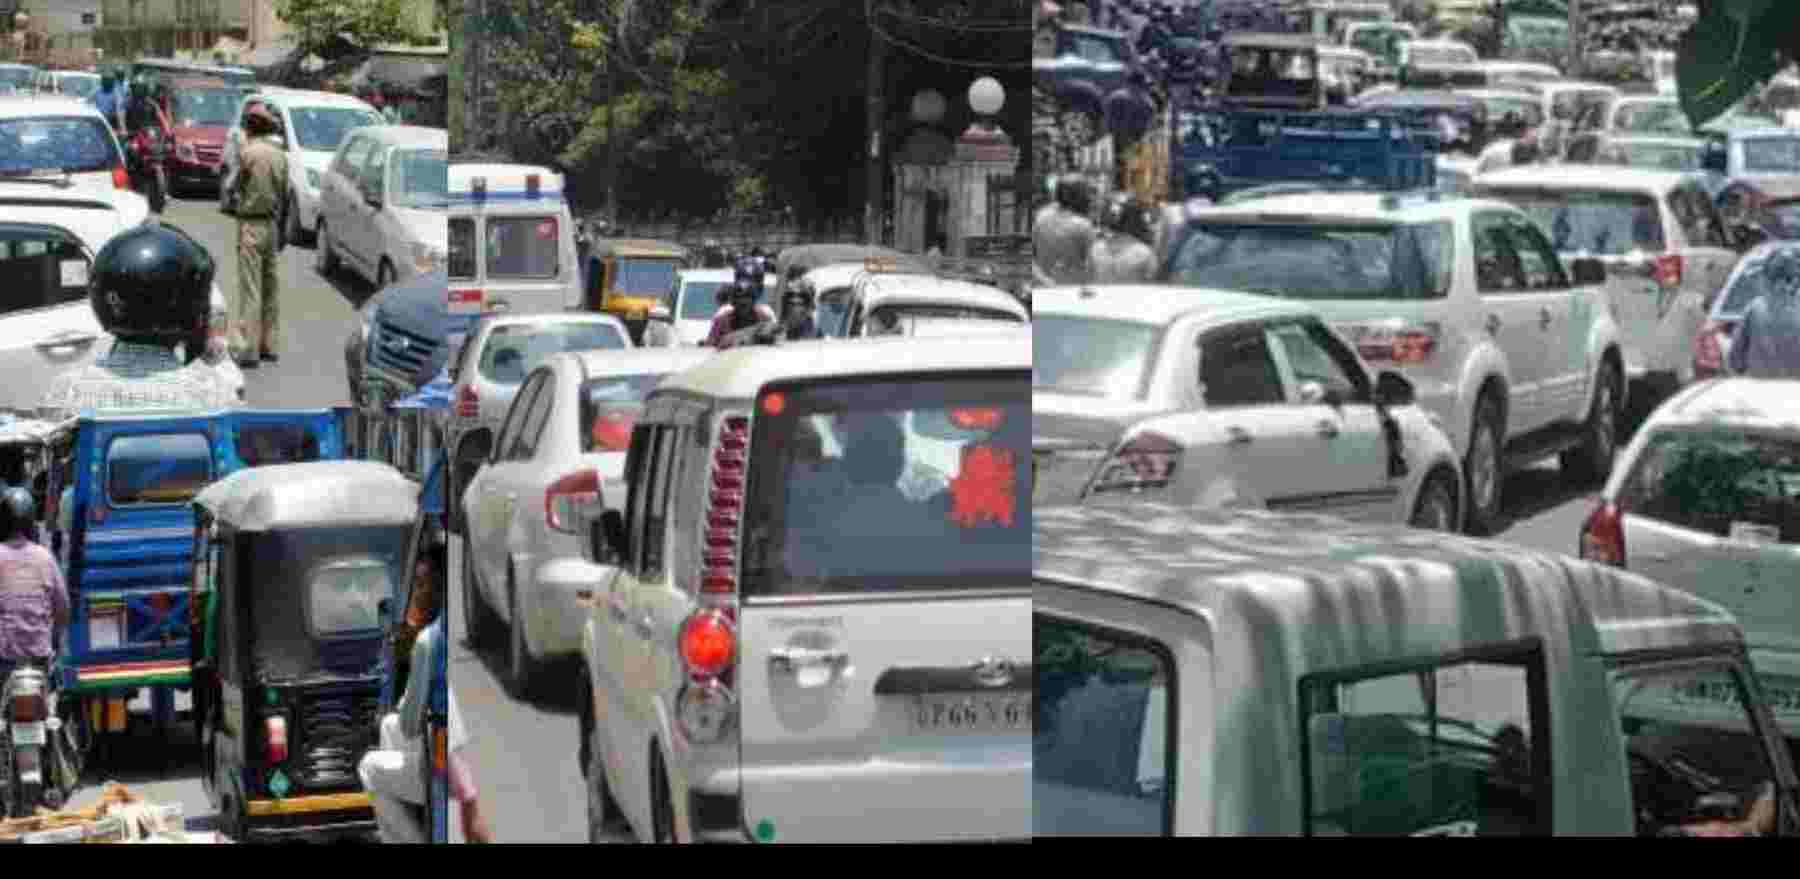 Uttarakhand news: New traffic route plan will be implemented on the roads of Dehradun from December 8. Dehradun Traffic Route plan